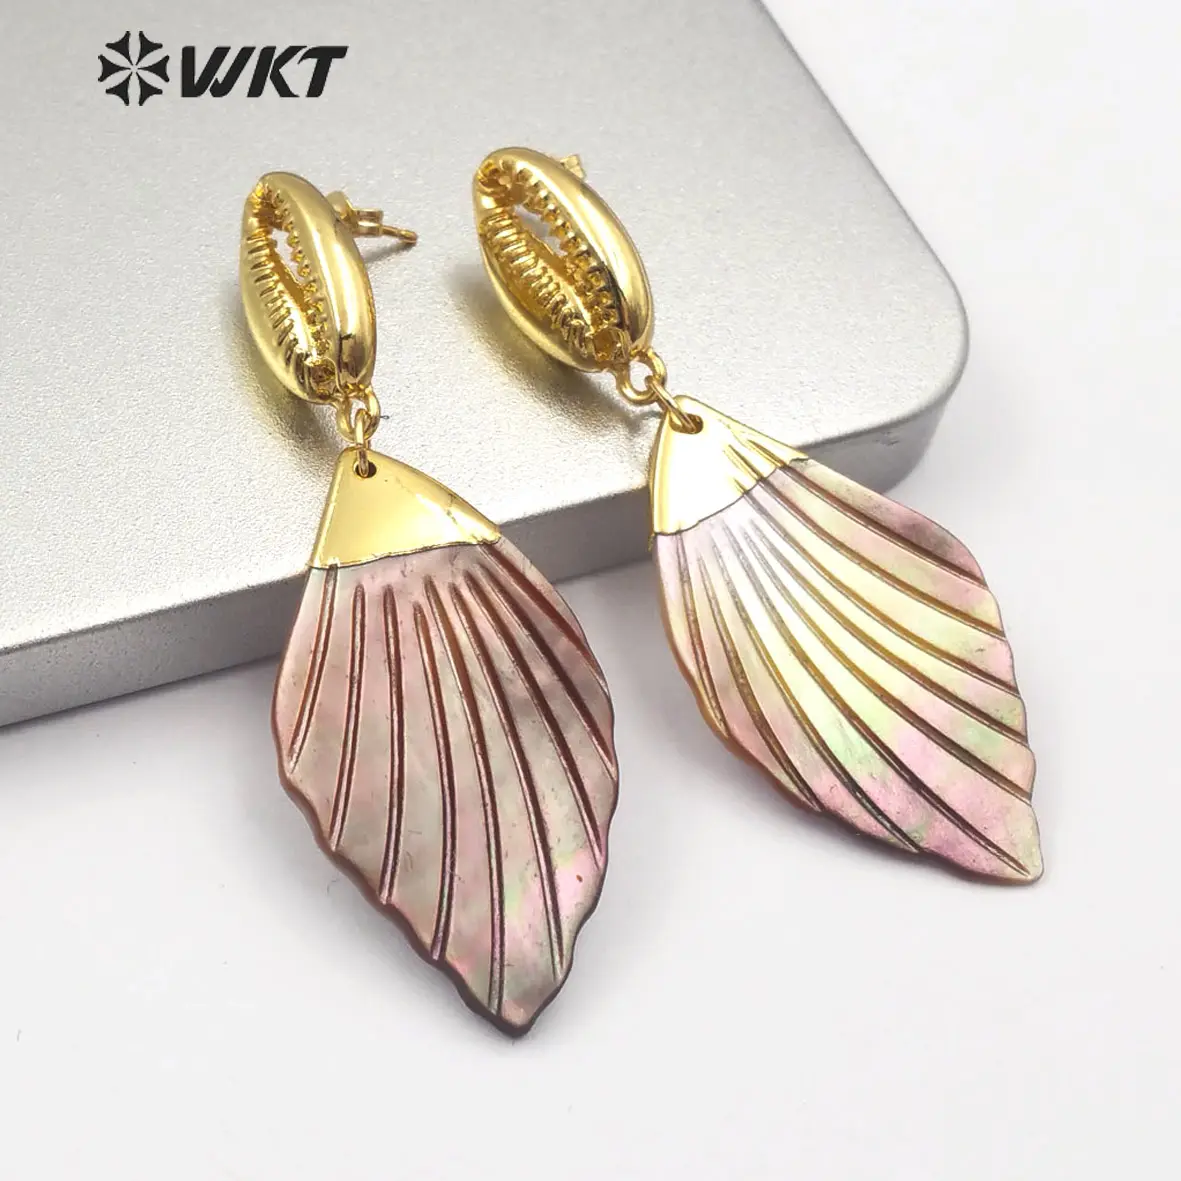 WT-E573 Wholesale Natural Shell And Cowrie Earring Gold Electroplated Leaf Shape Earrings Women Fashion Shell Earrings Jewelry